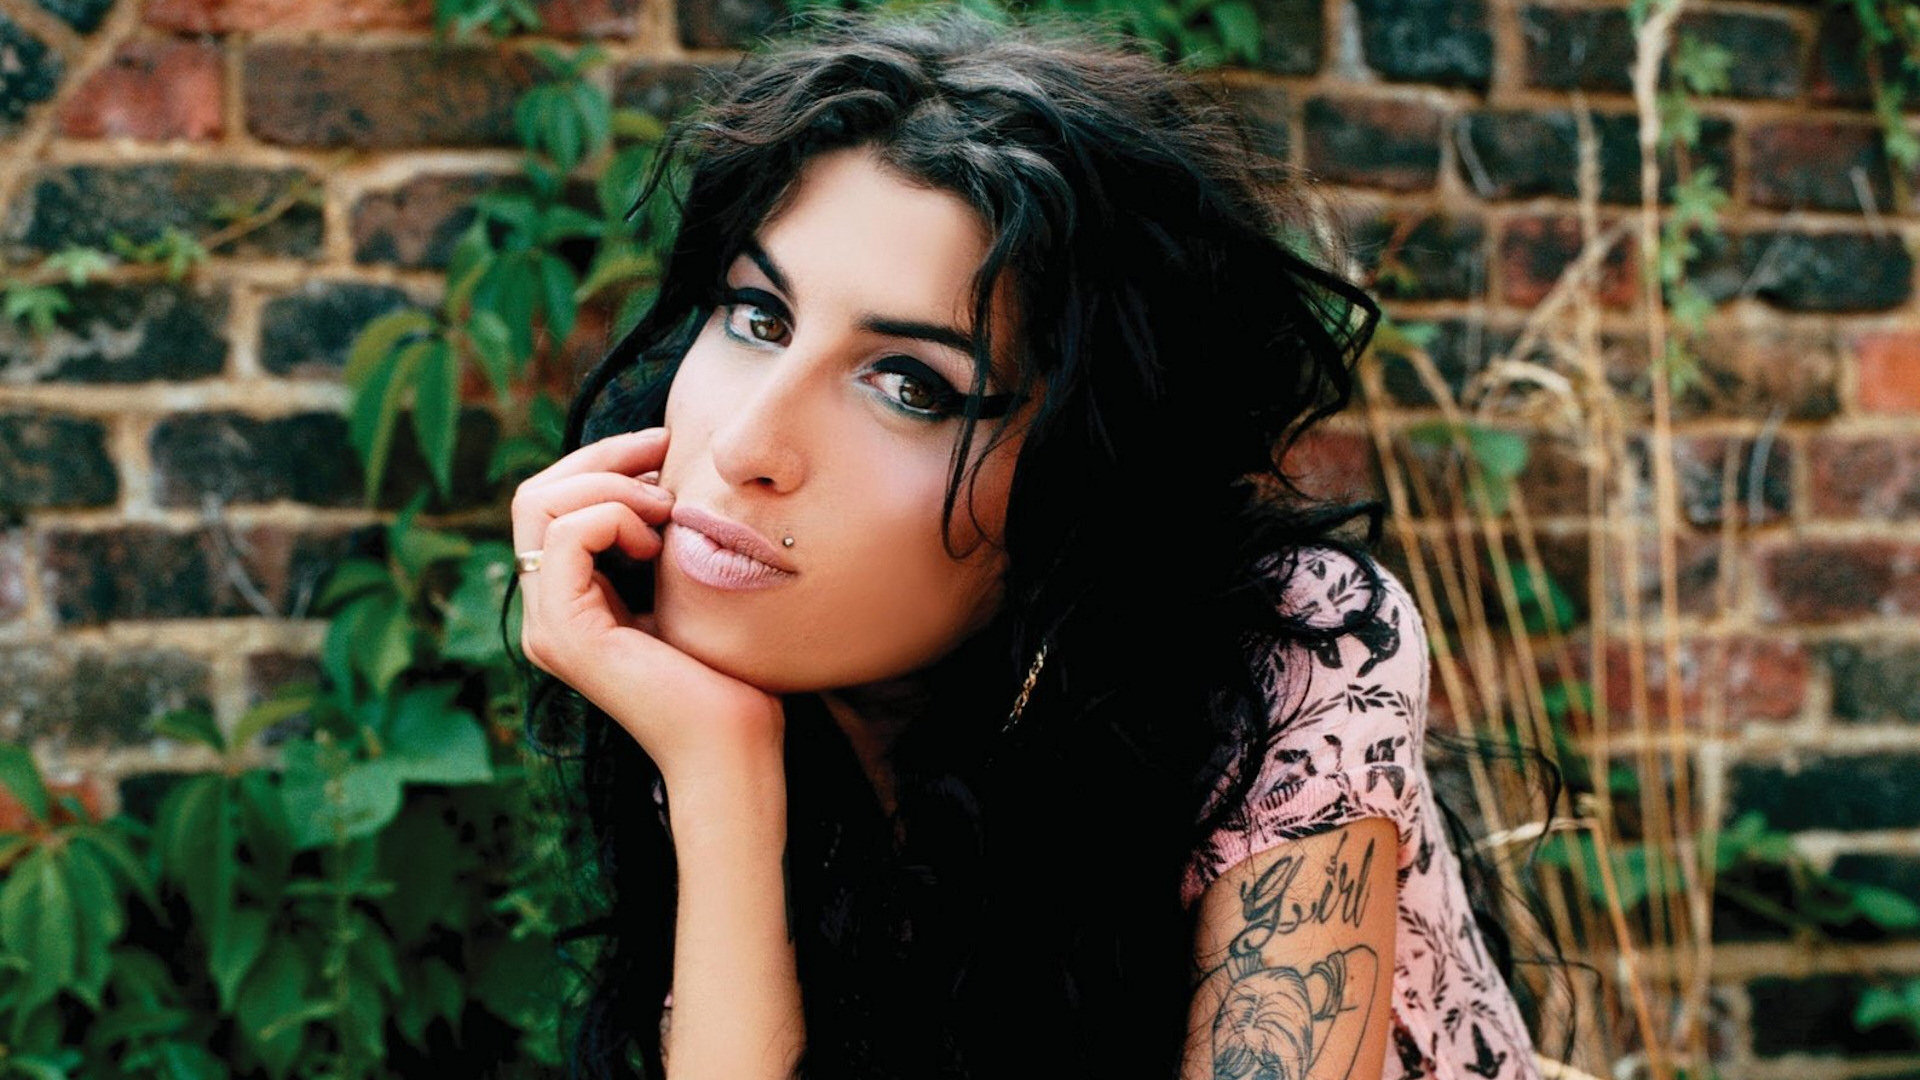 Download full hd Amy Winehouse PC background ID:62203 for free